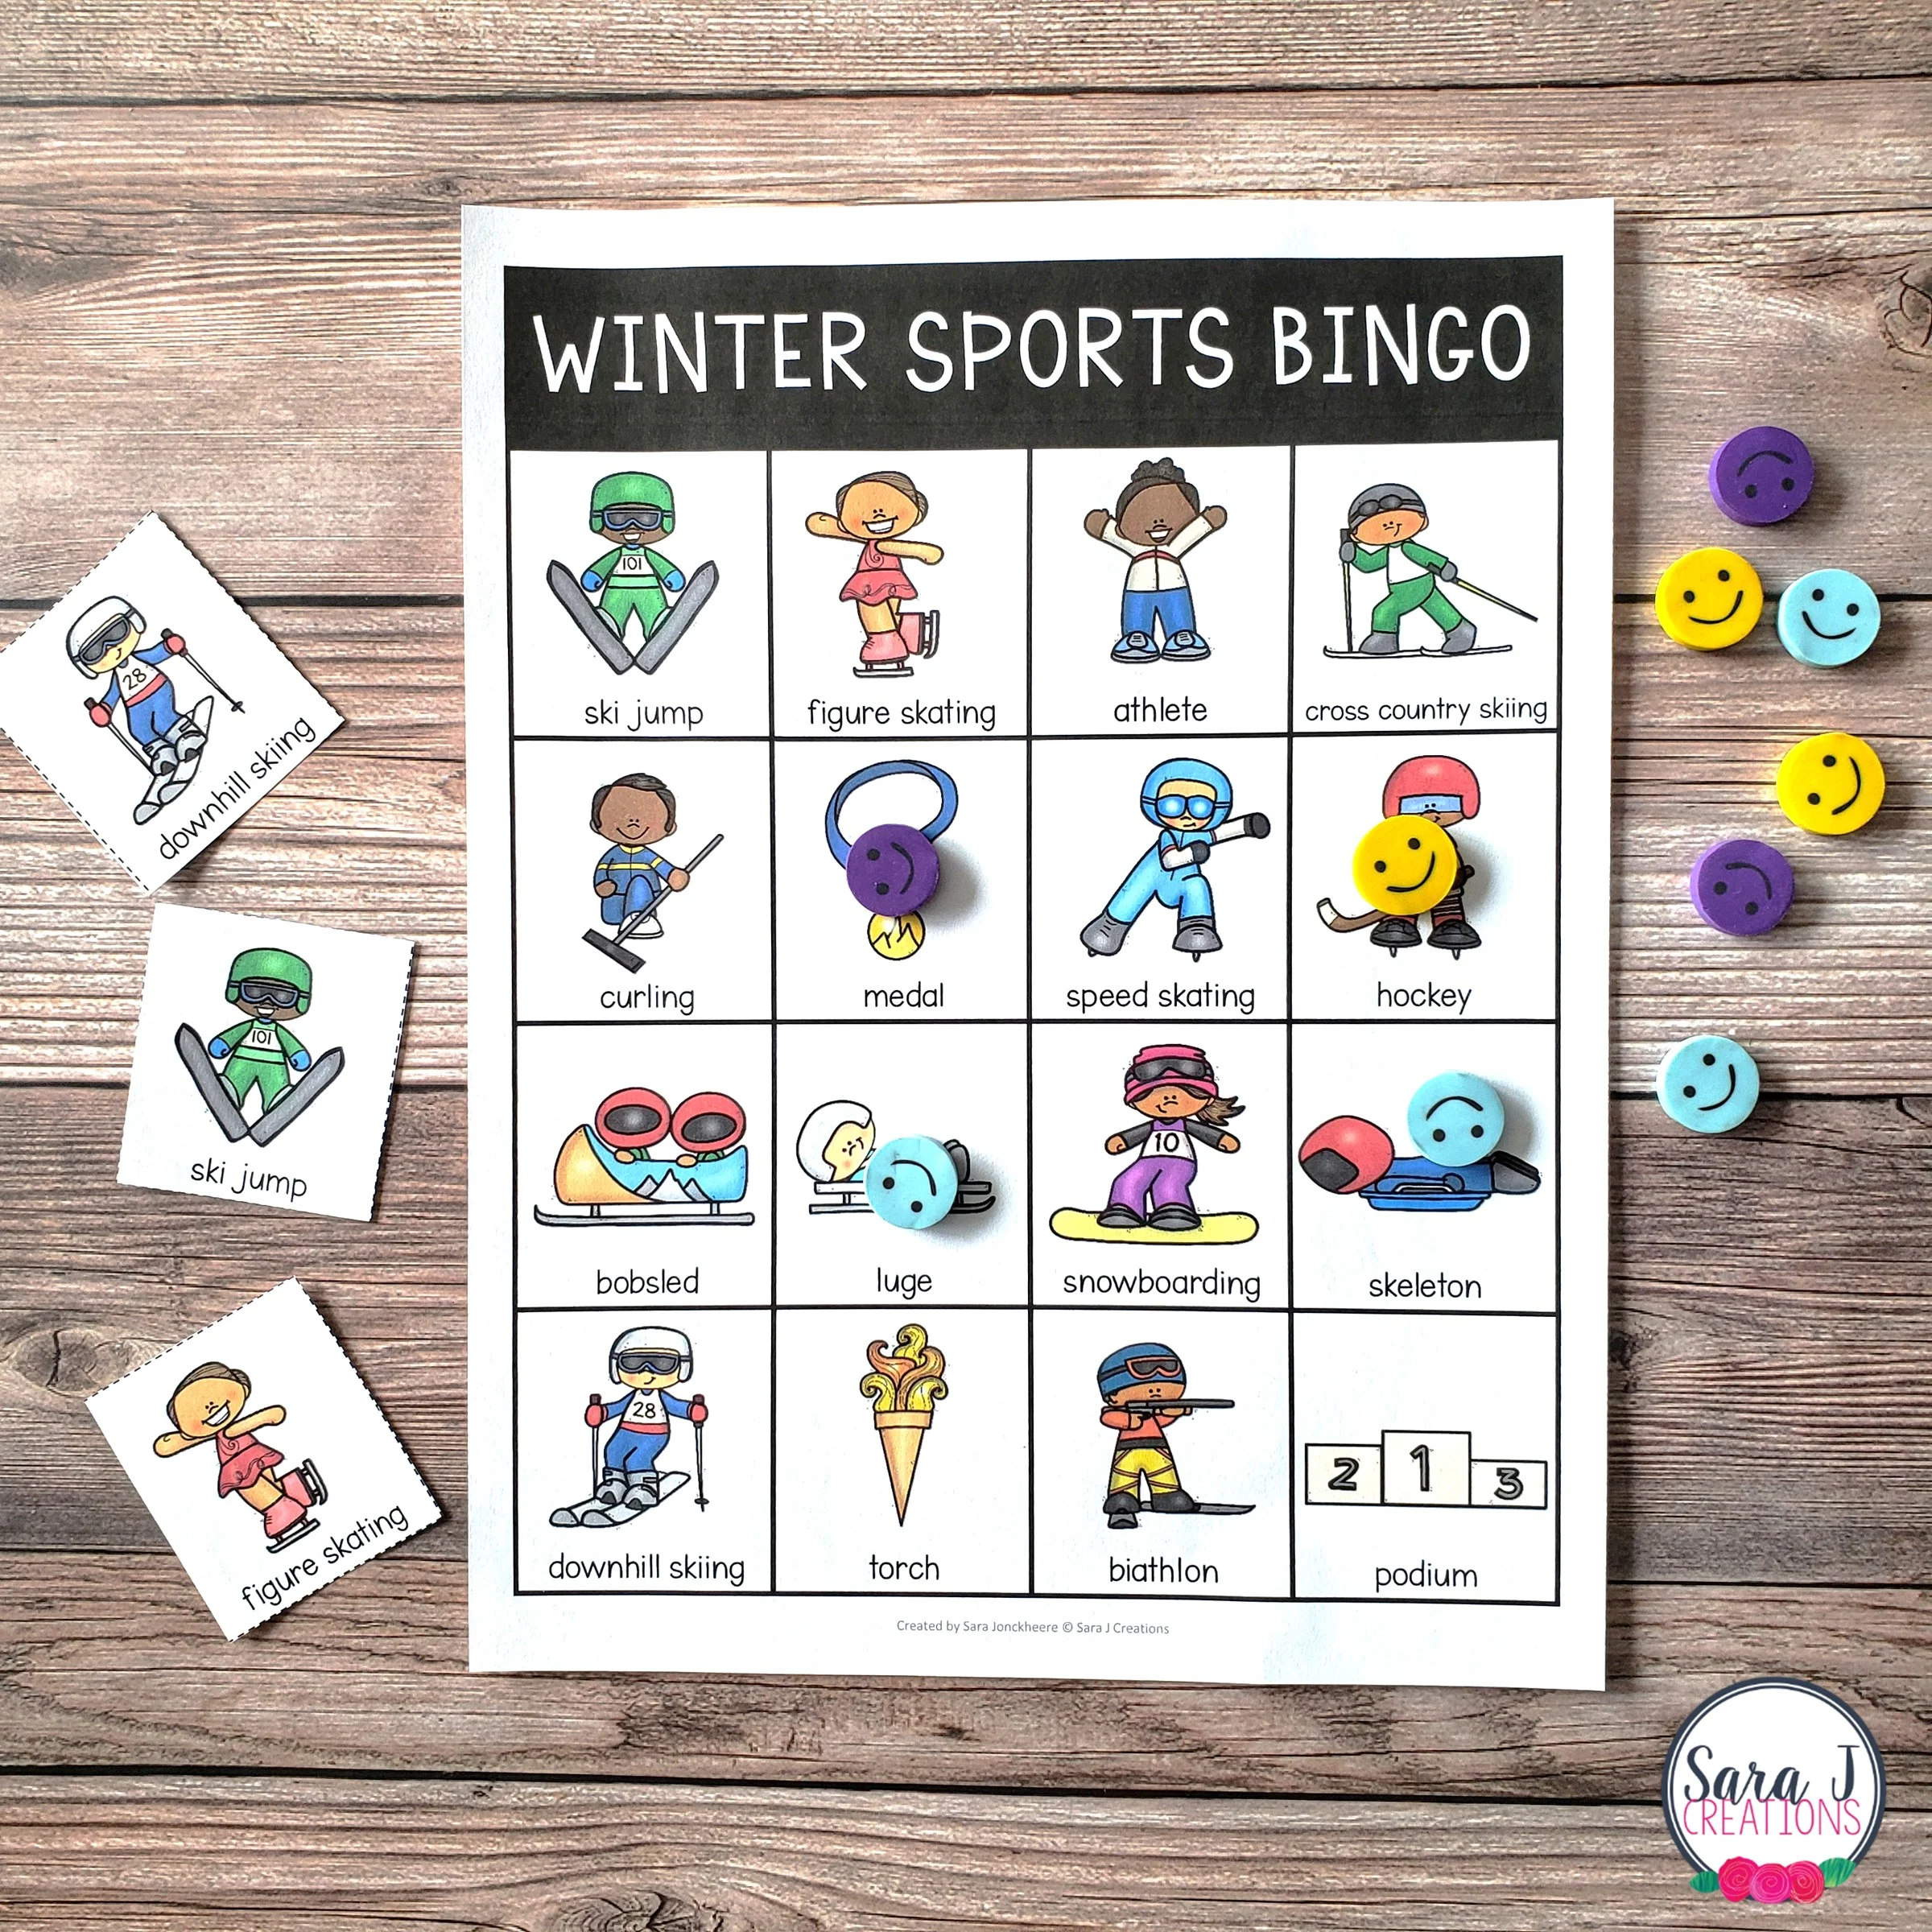 Get your students excited to watch the Winter Games with this fun bingo game. Great way for kids to learn vocabulary of the different sports played at the Winter Olympics.